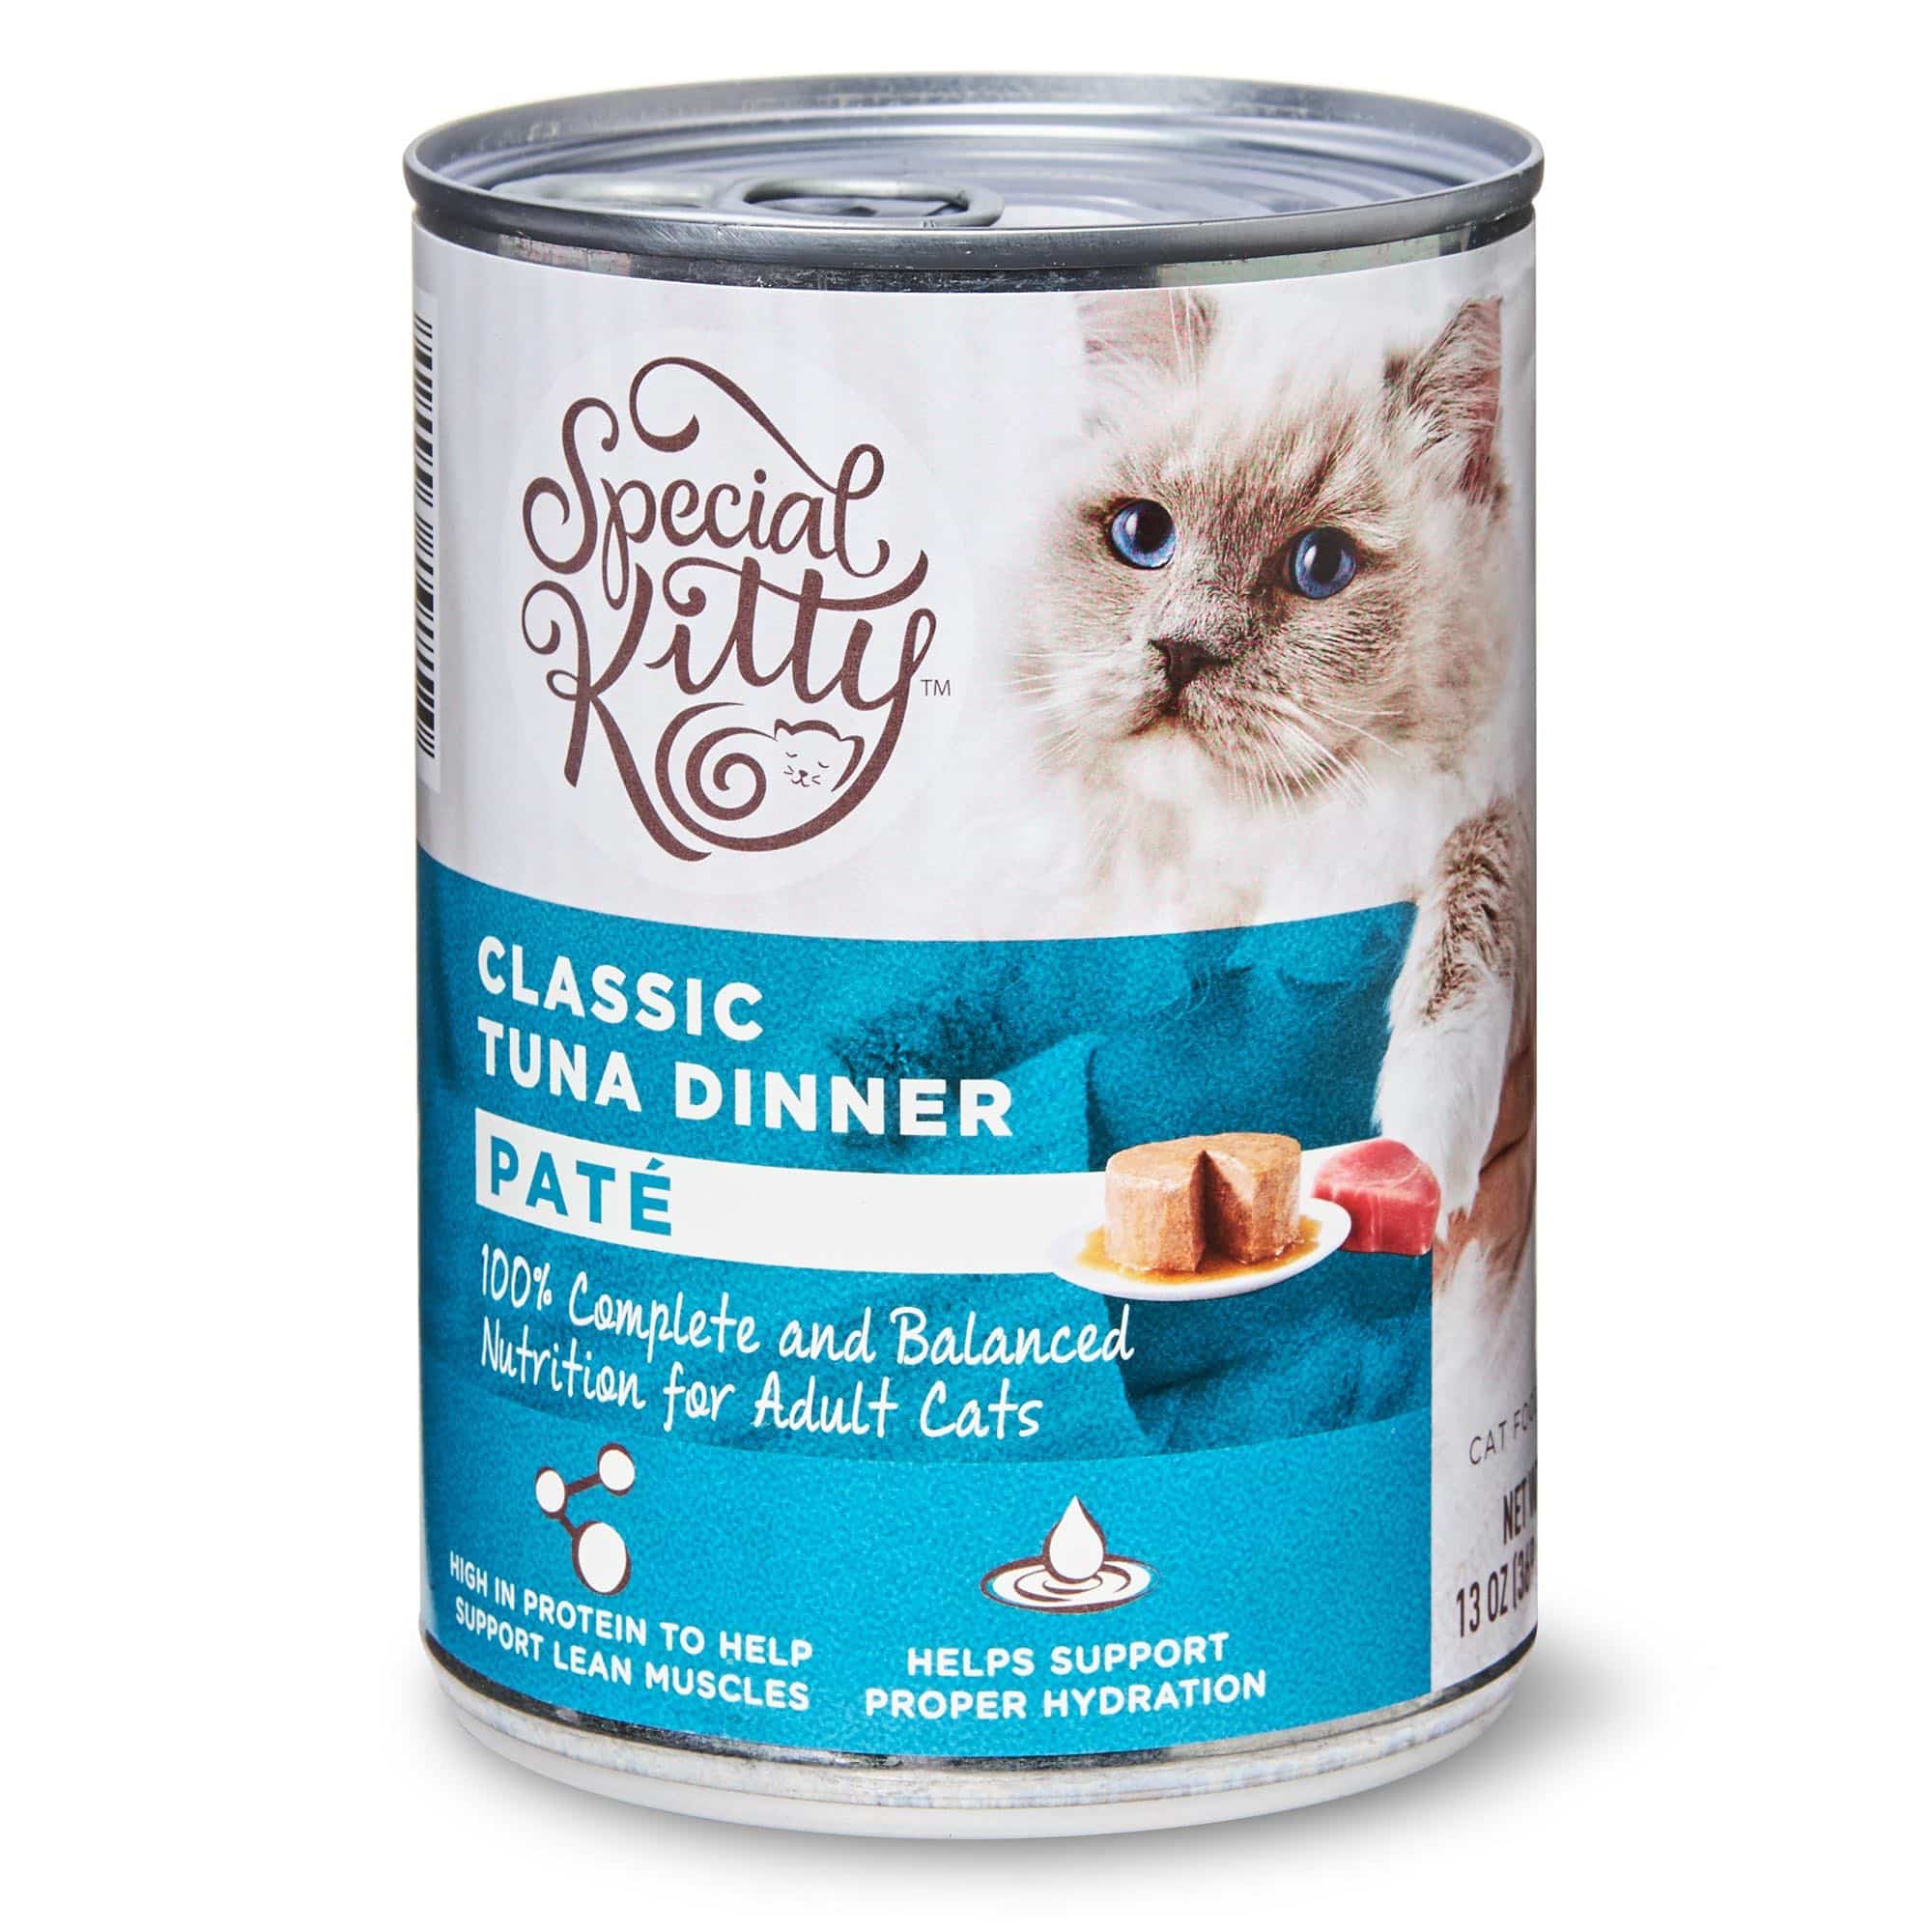 Special Kitty Classic Tuna Dinner Pate Wet Cat Food, 13 oz